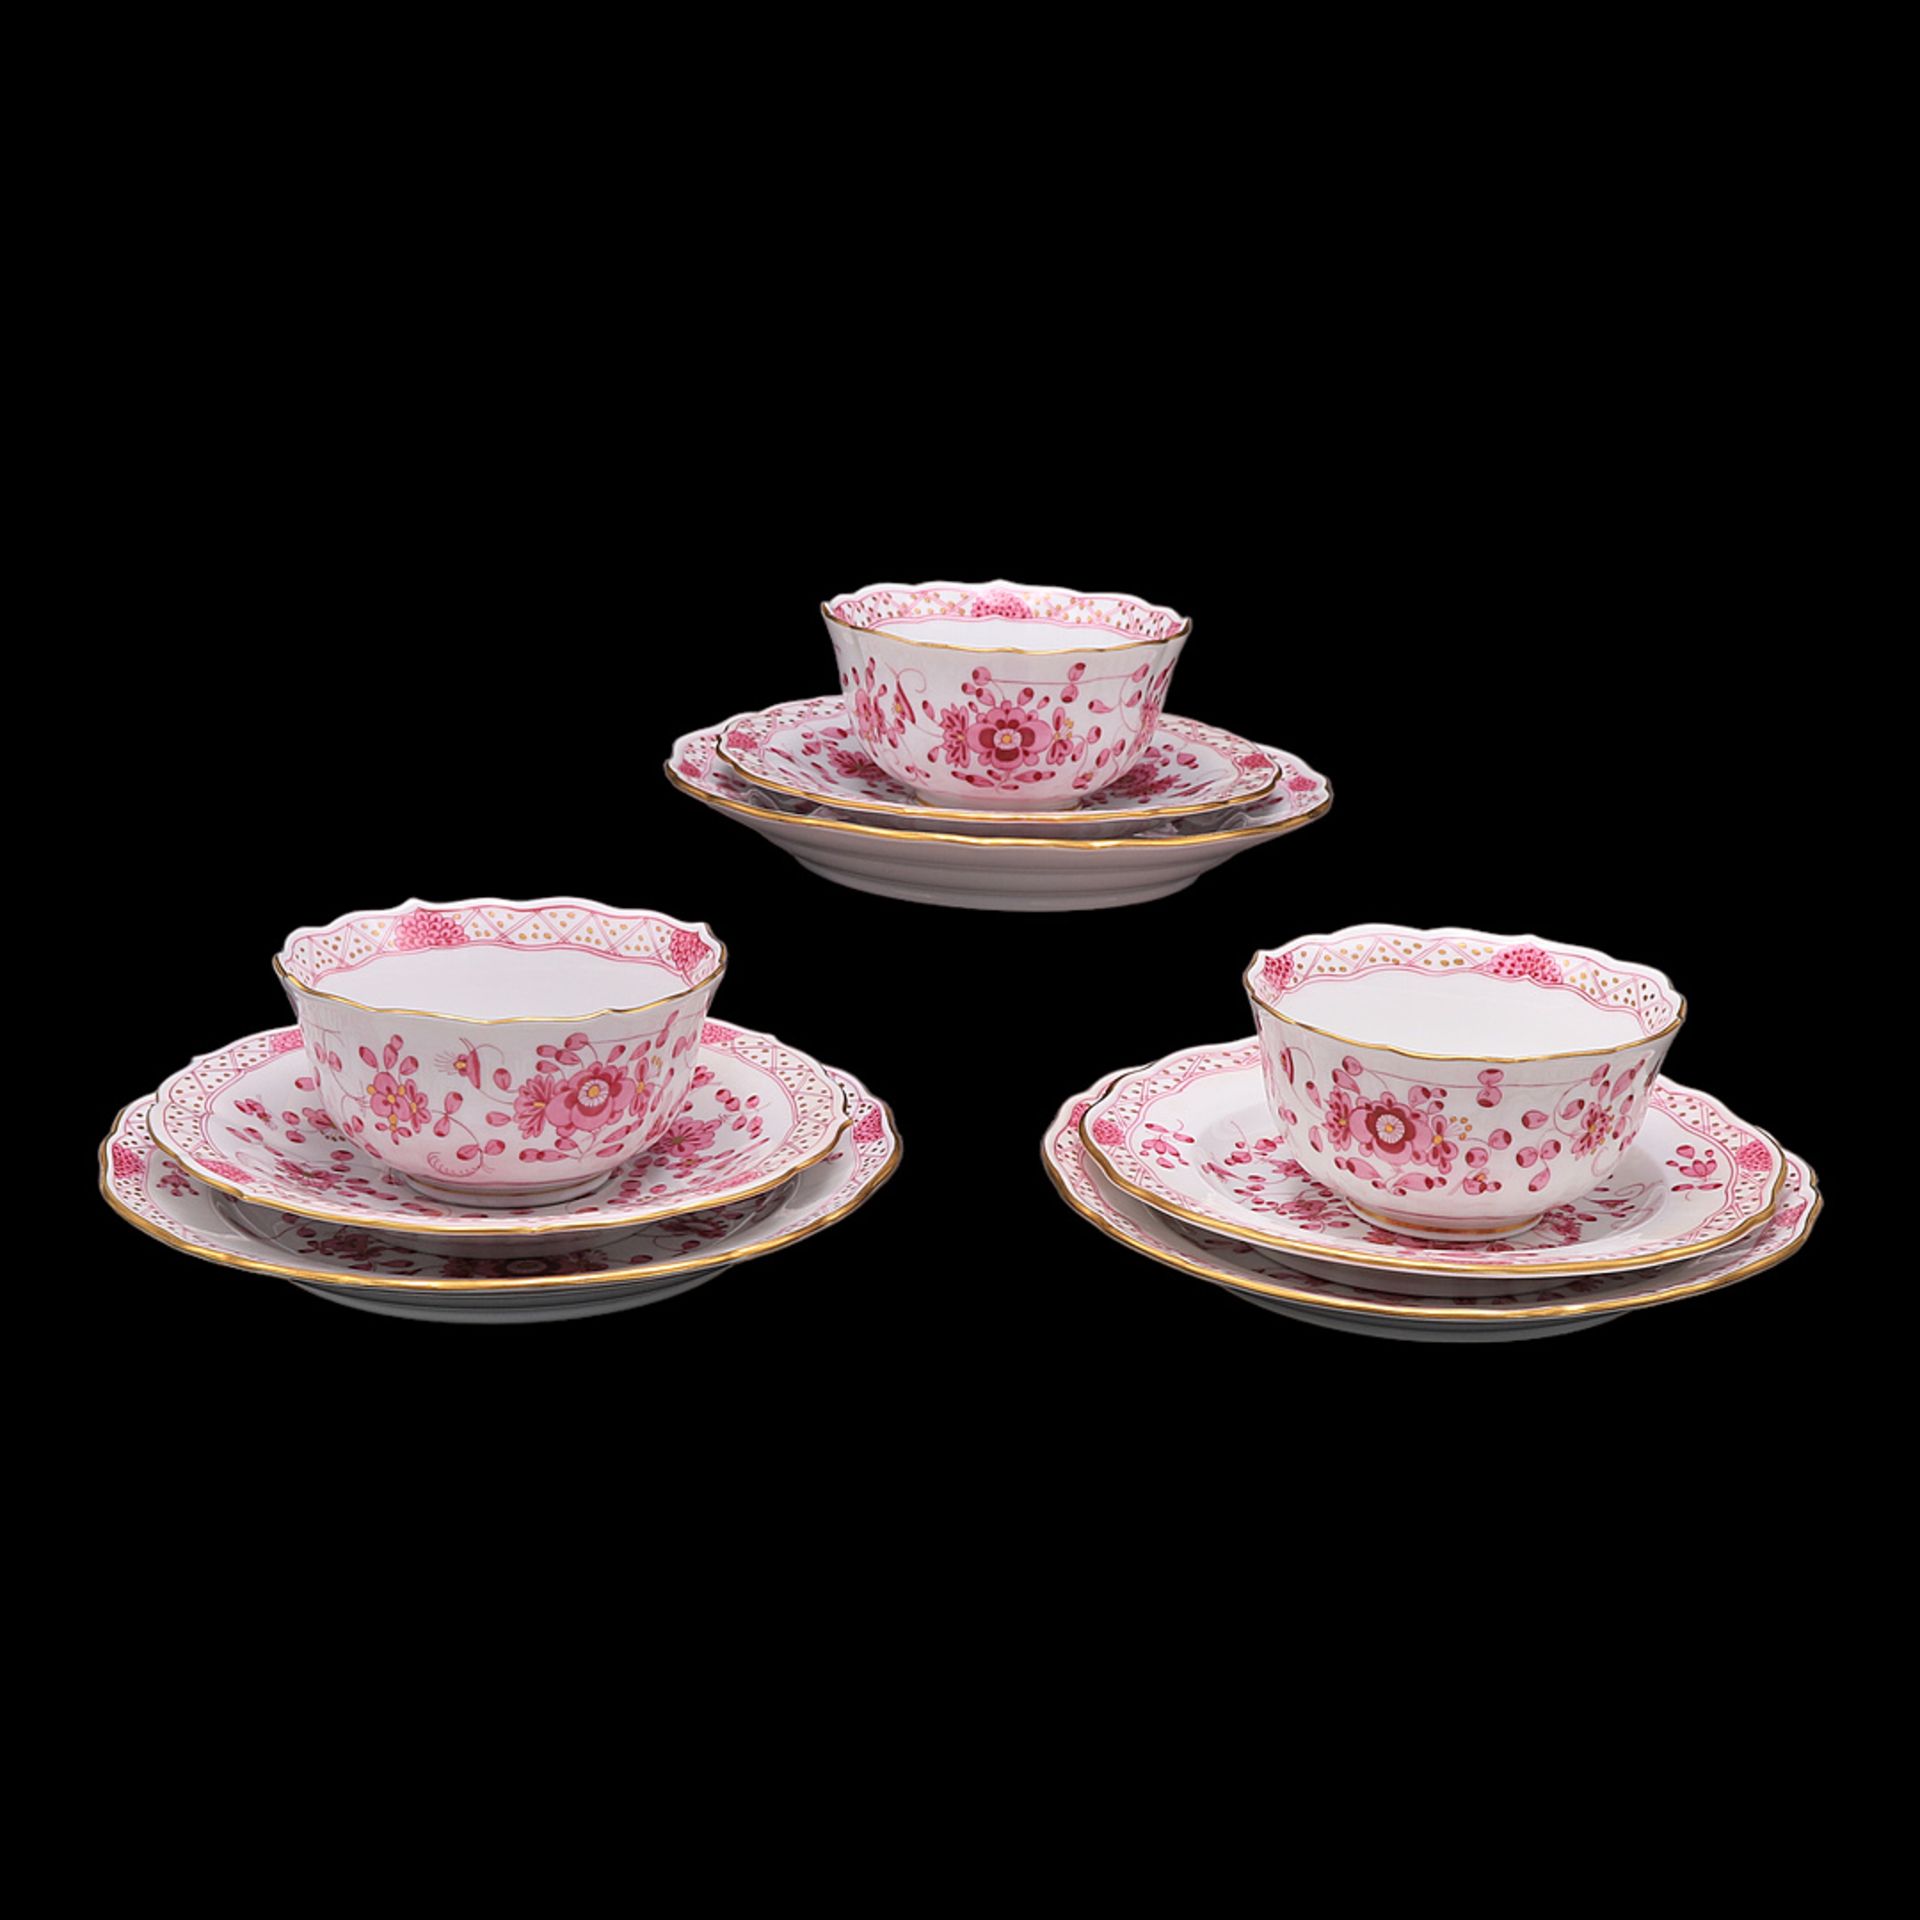 Three Meissen tea sets with Indian painting, 20th century